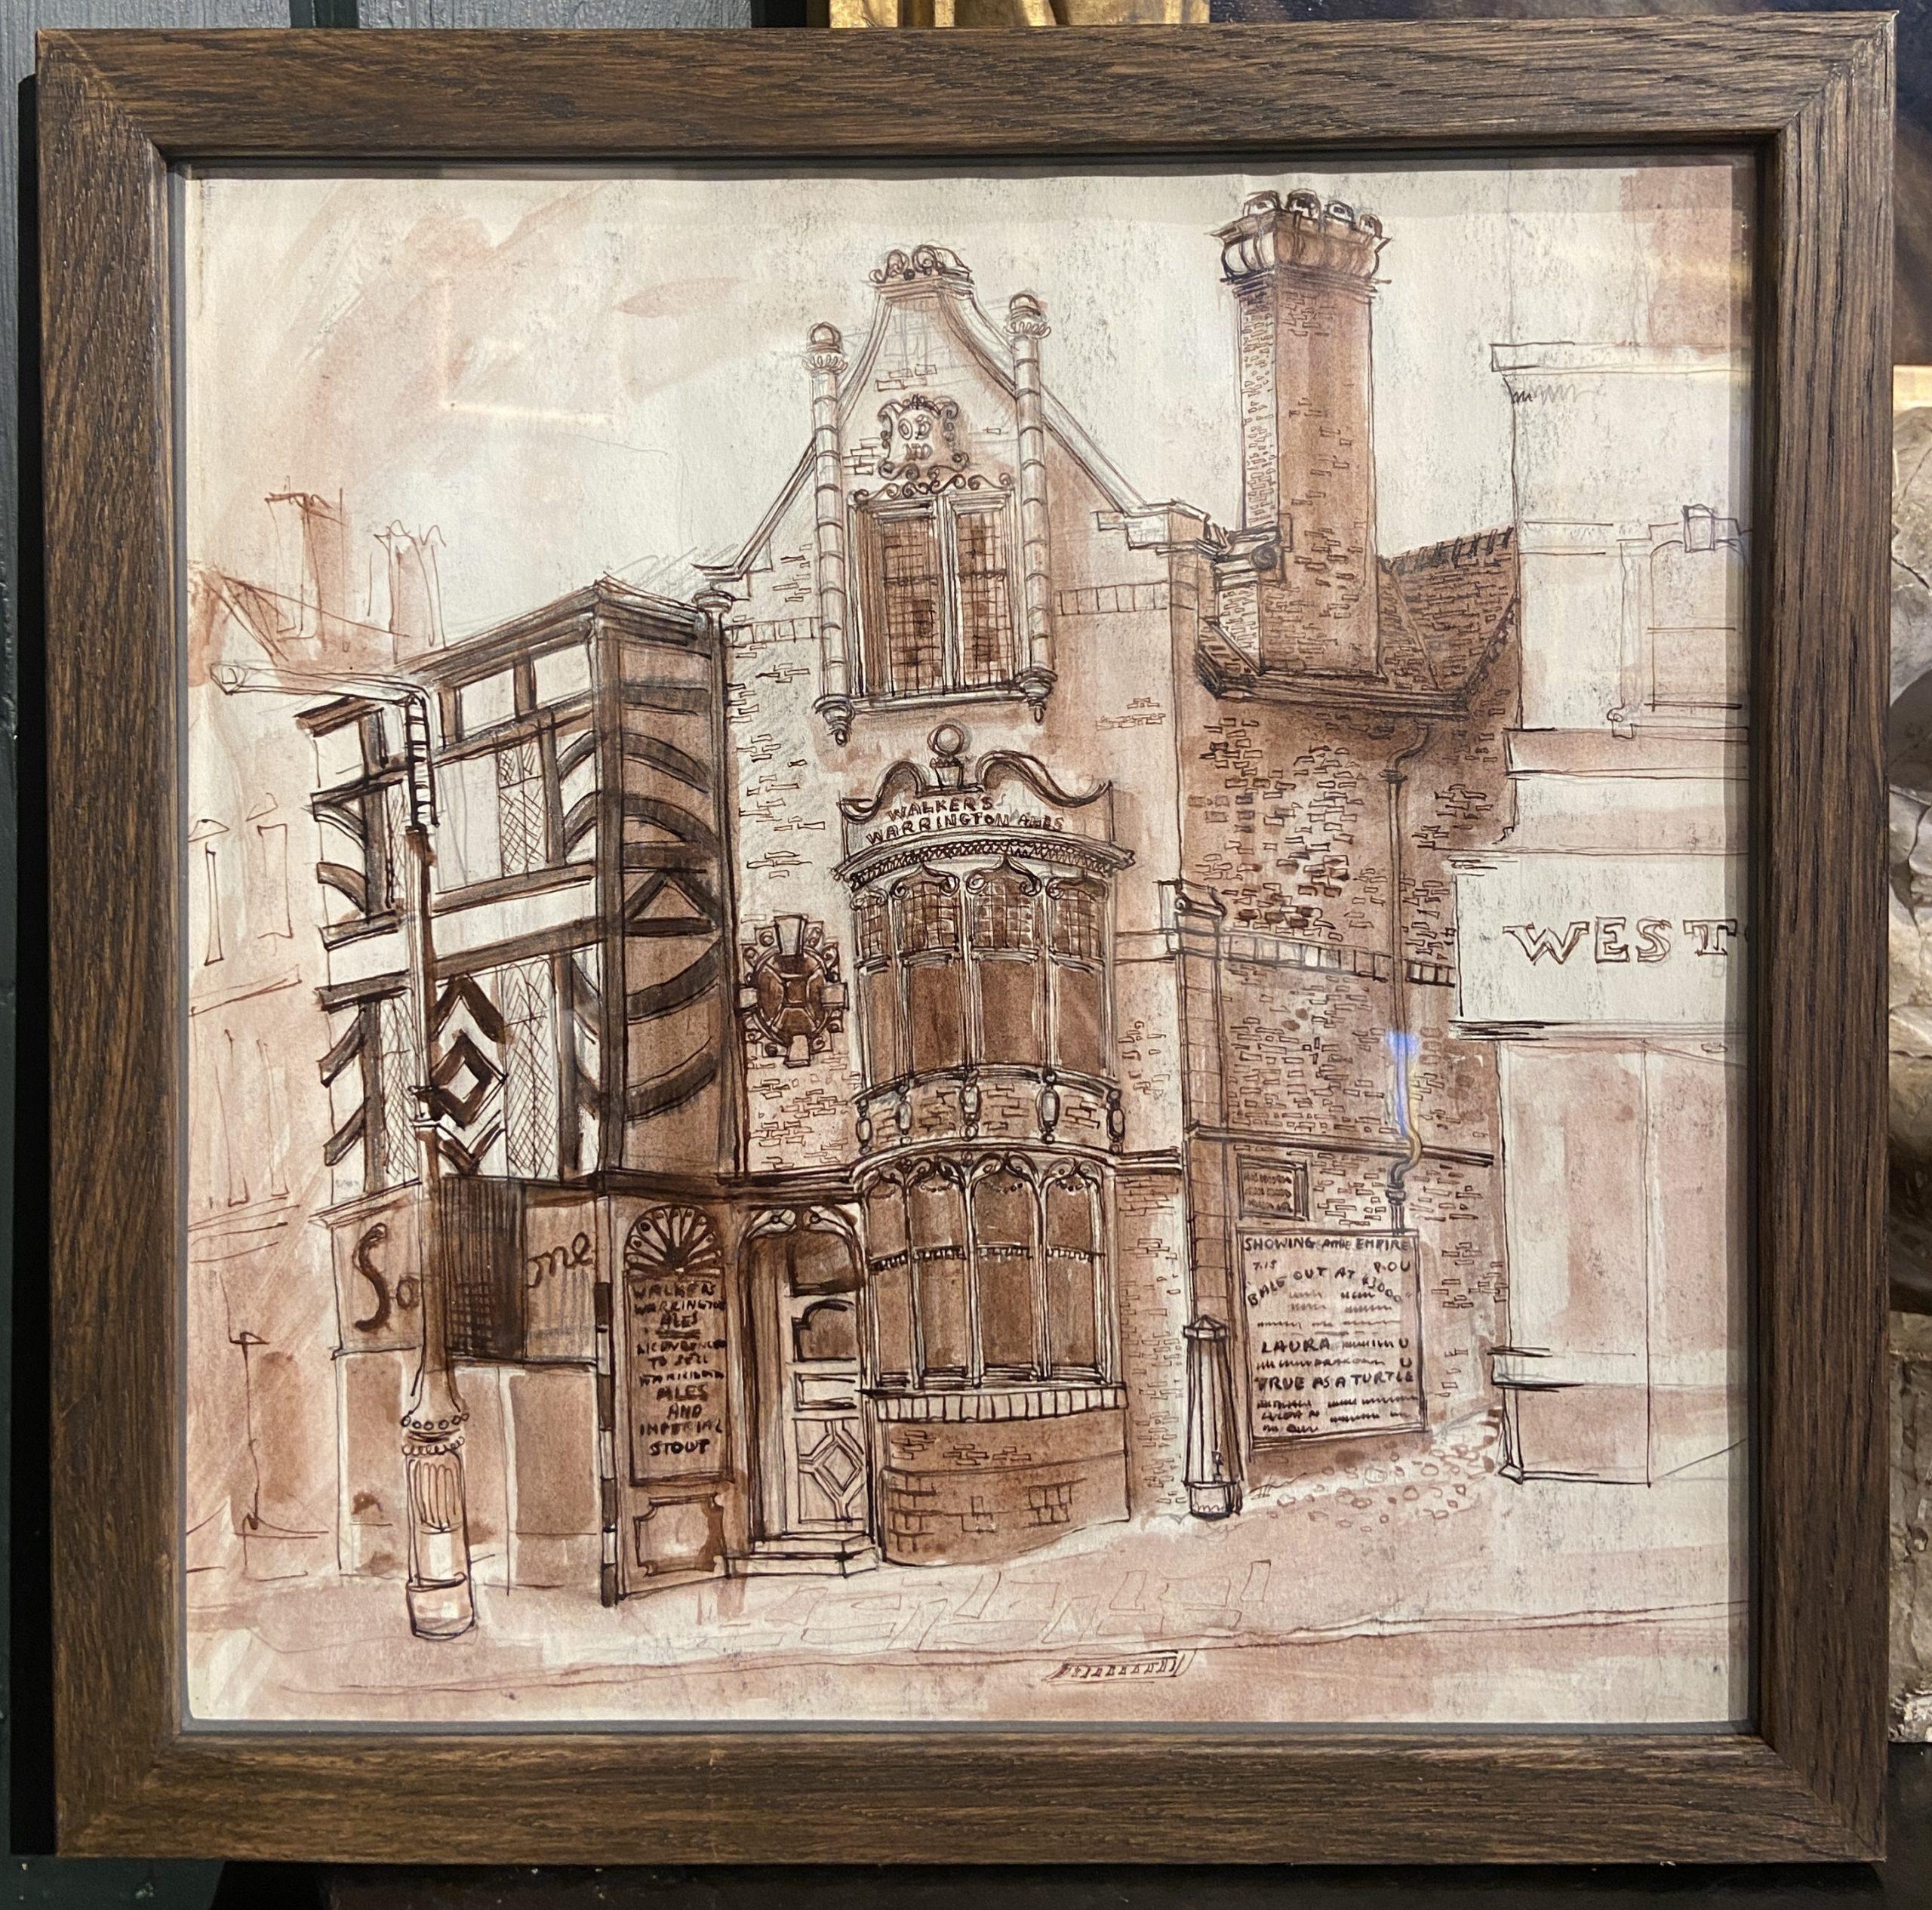 Ink and Watercolour Sketches, Wigan School, 20th Century British - Art by 20th Century British School